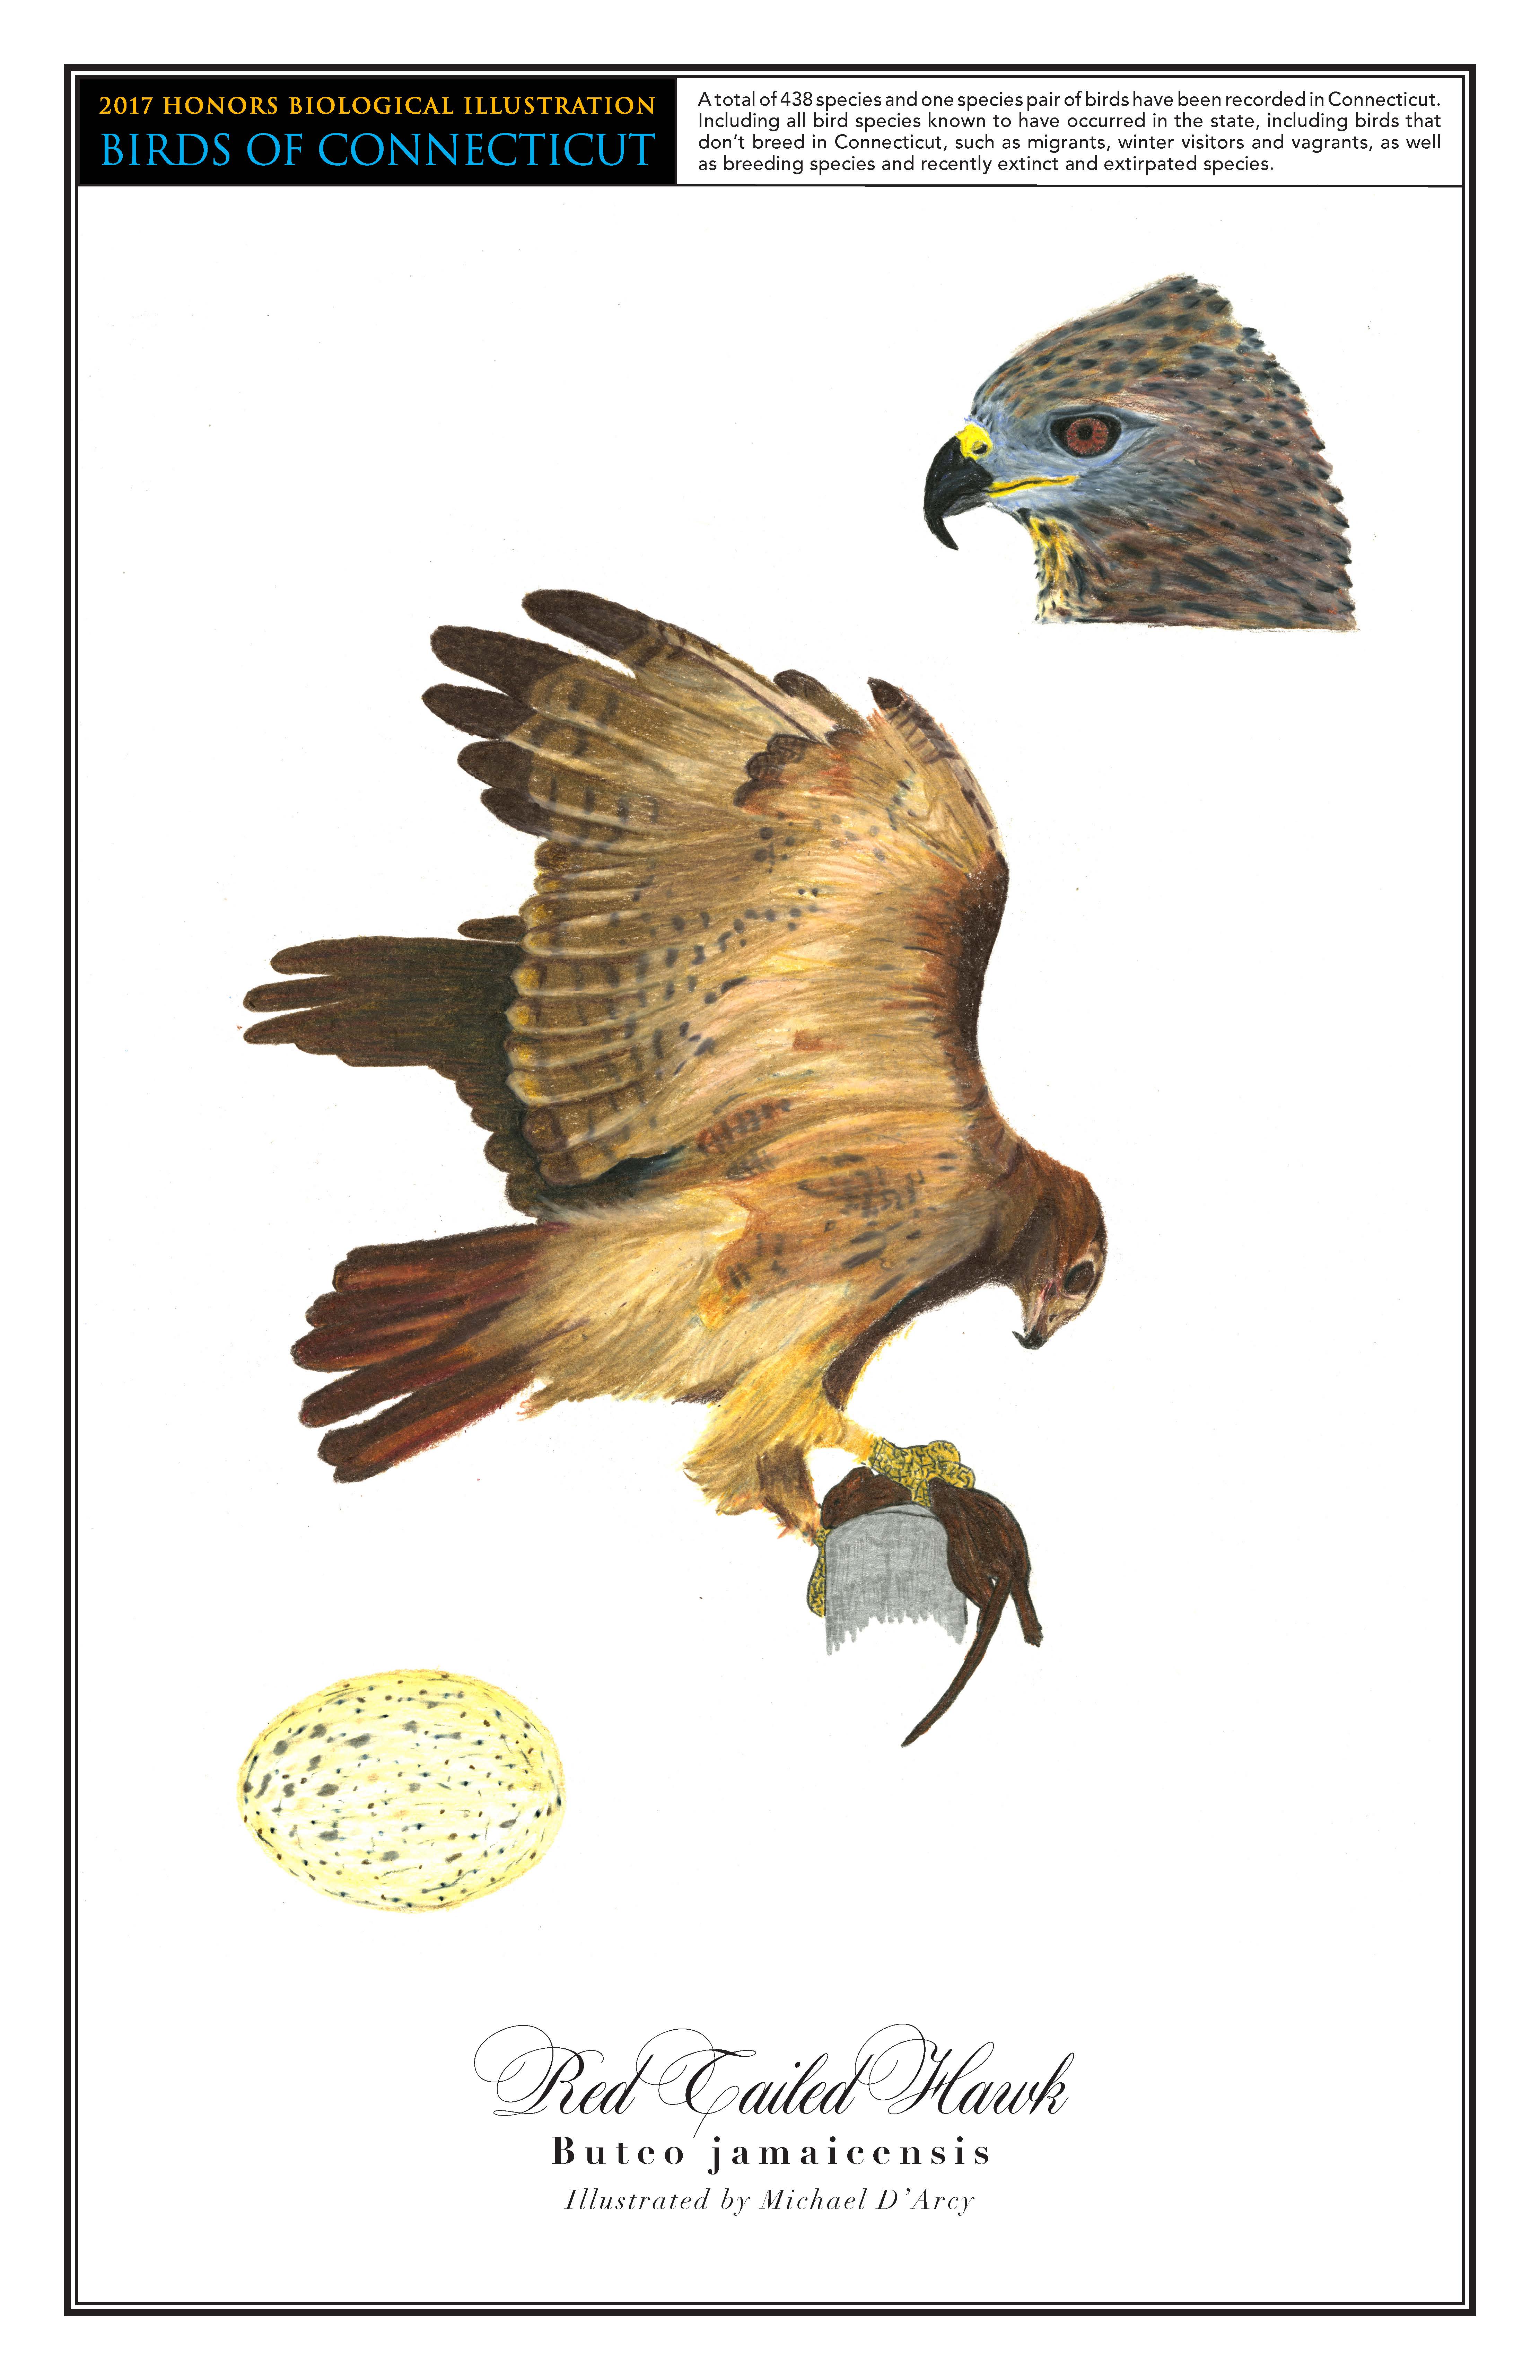 d’arcy-redtailed hawk